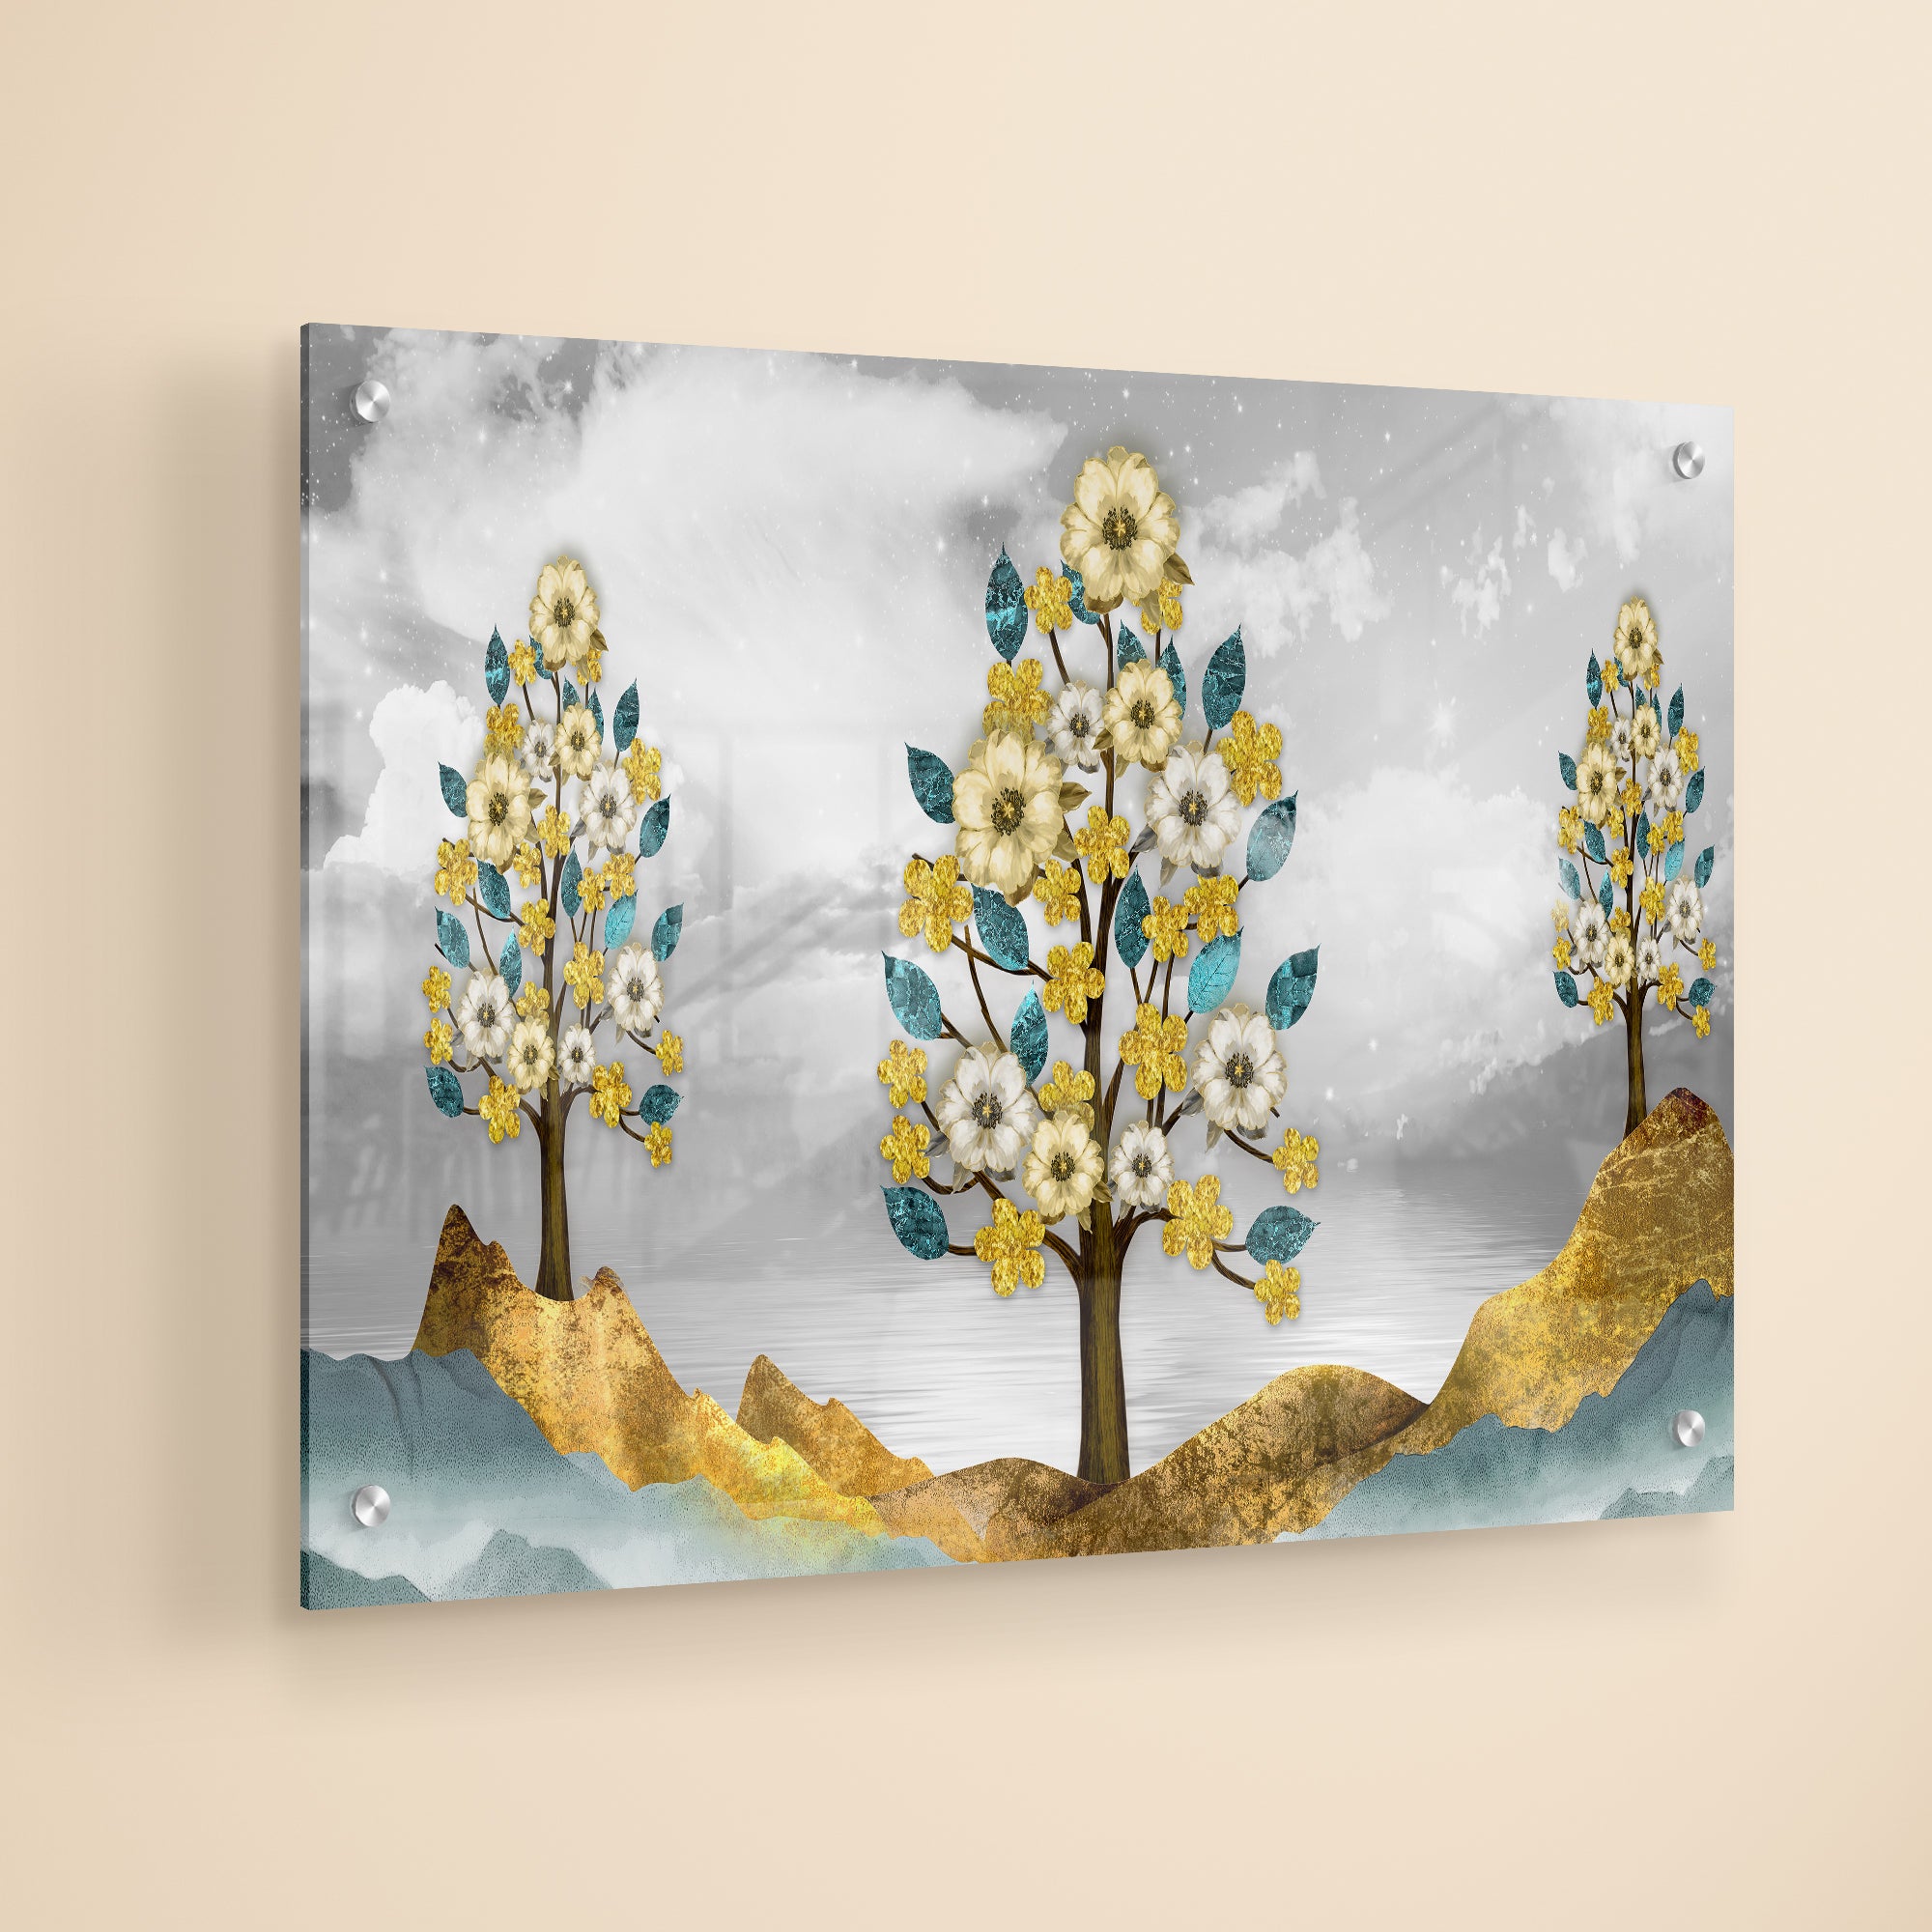 Beautiful Golden Flowers and Turquoise Mountains Acrylic Wall Painting